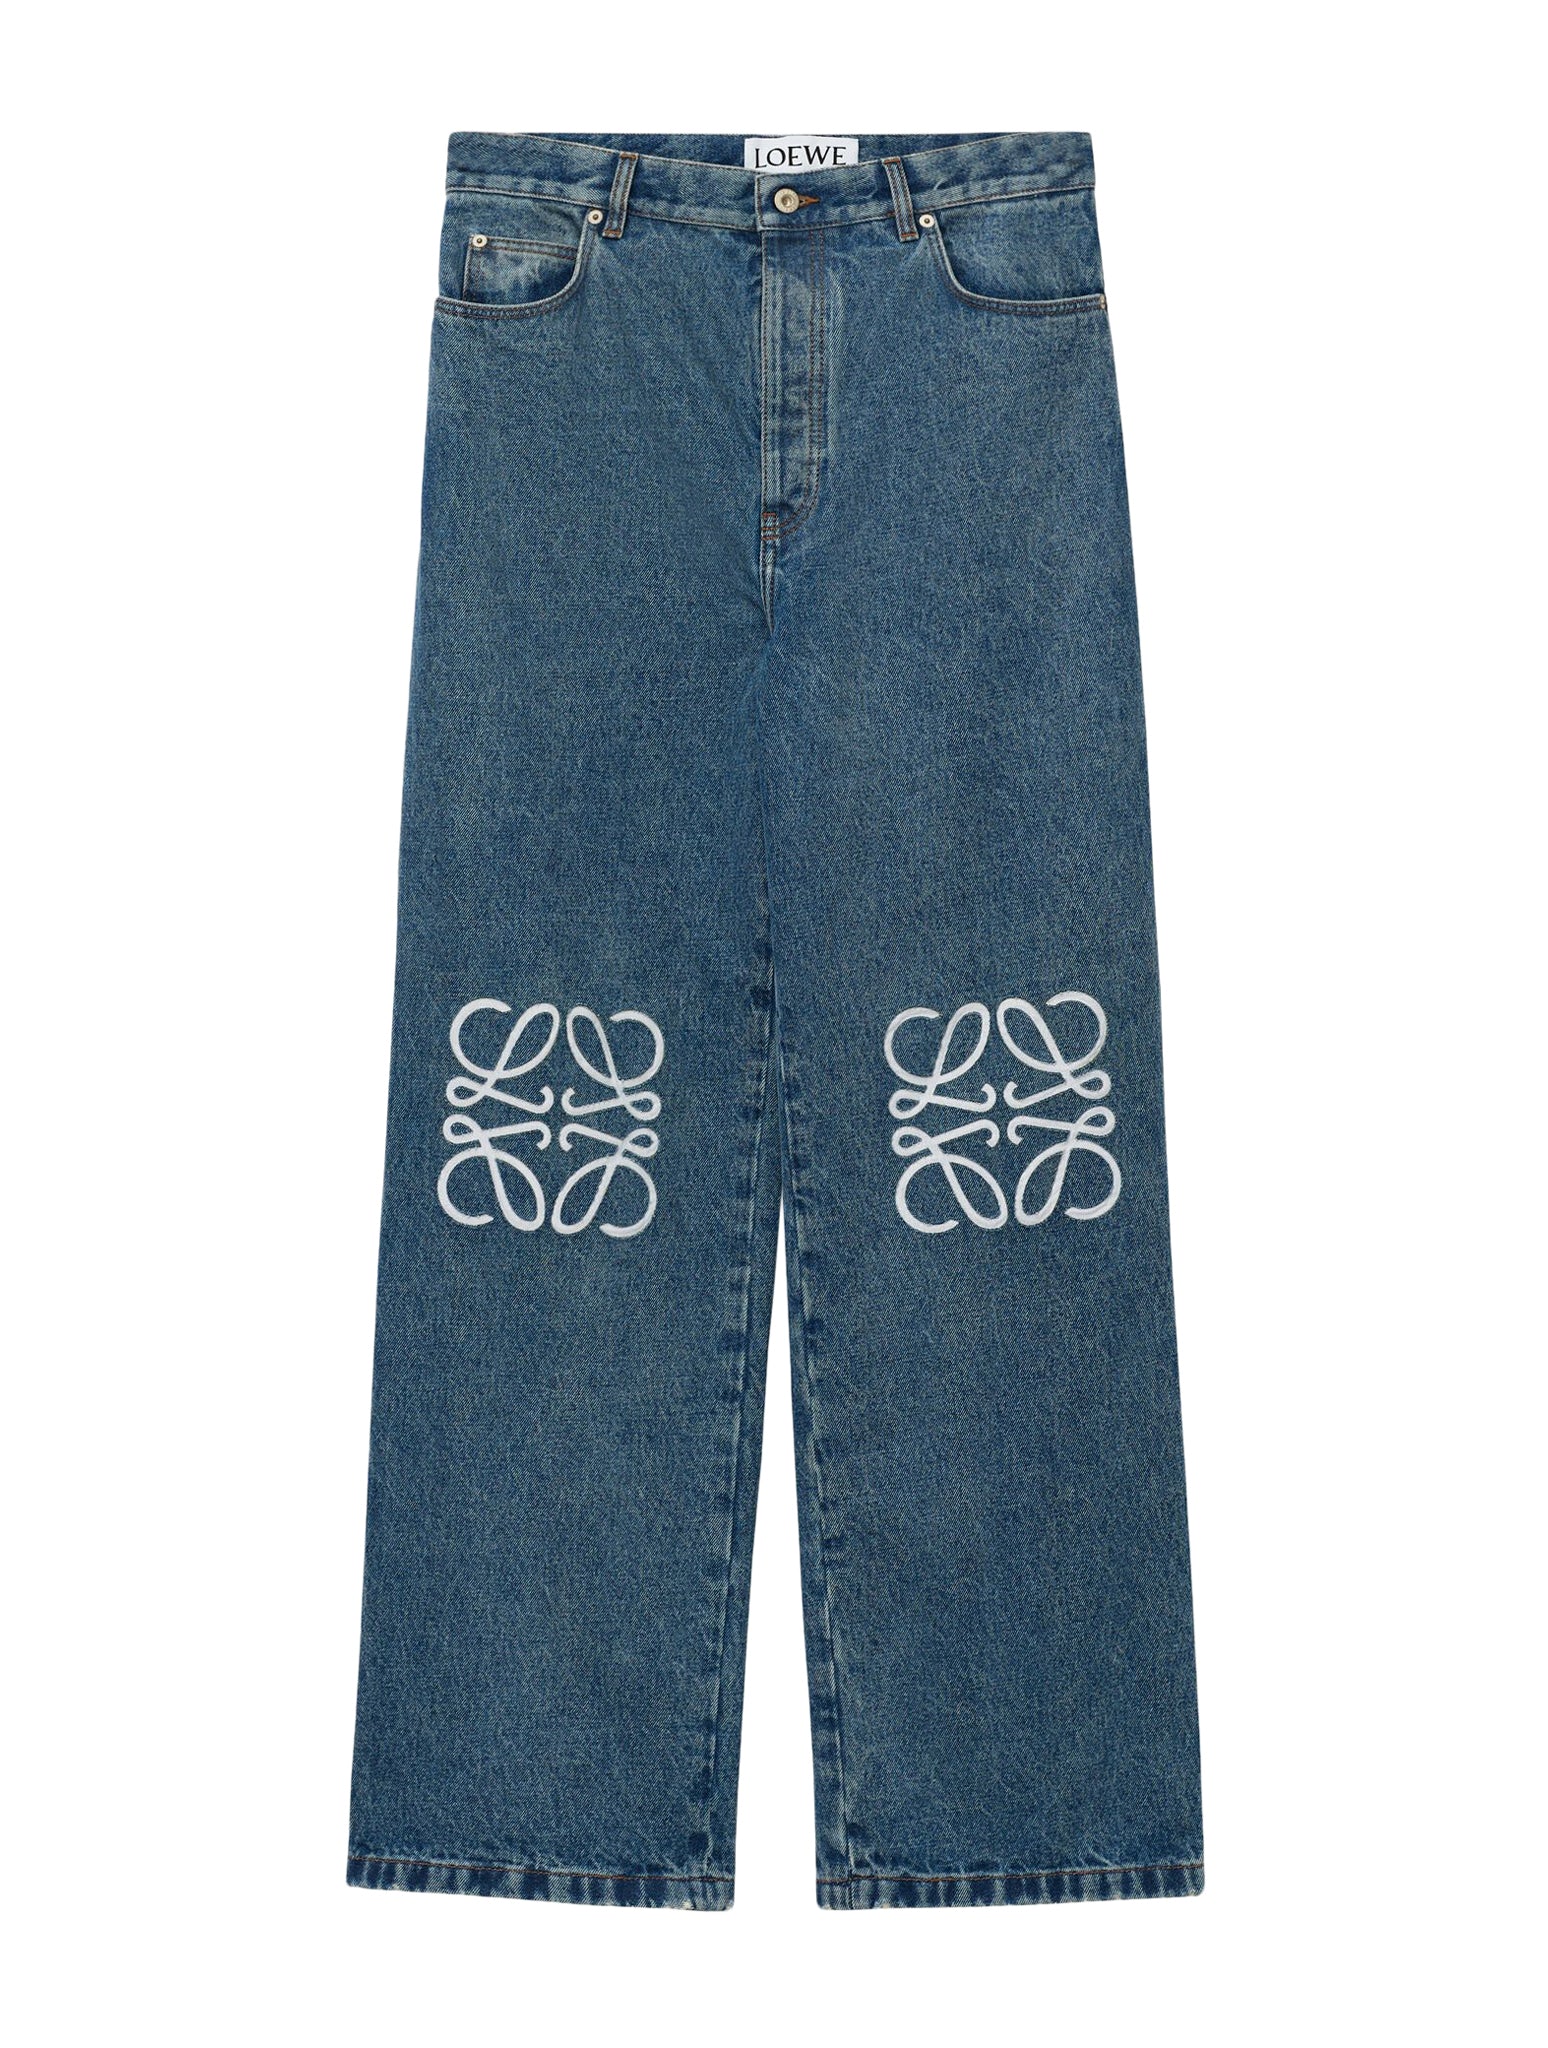 ANAGRAM BAGGY JEANS